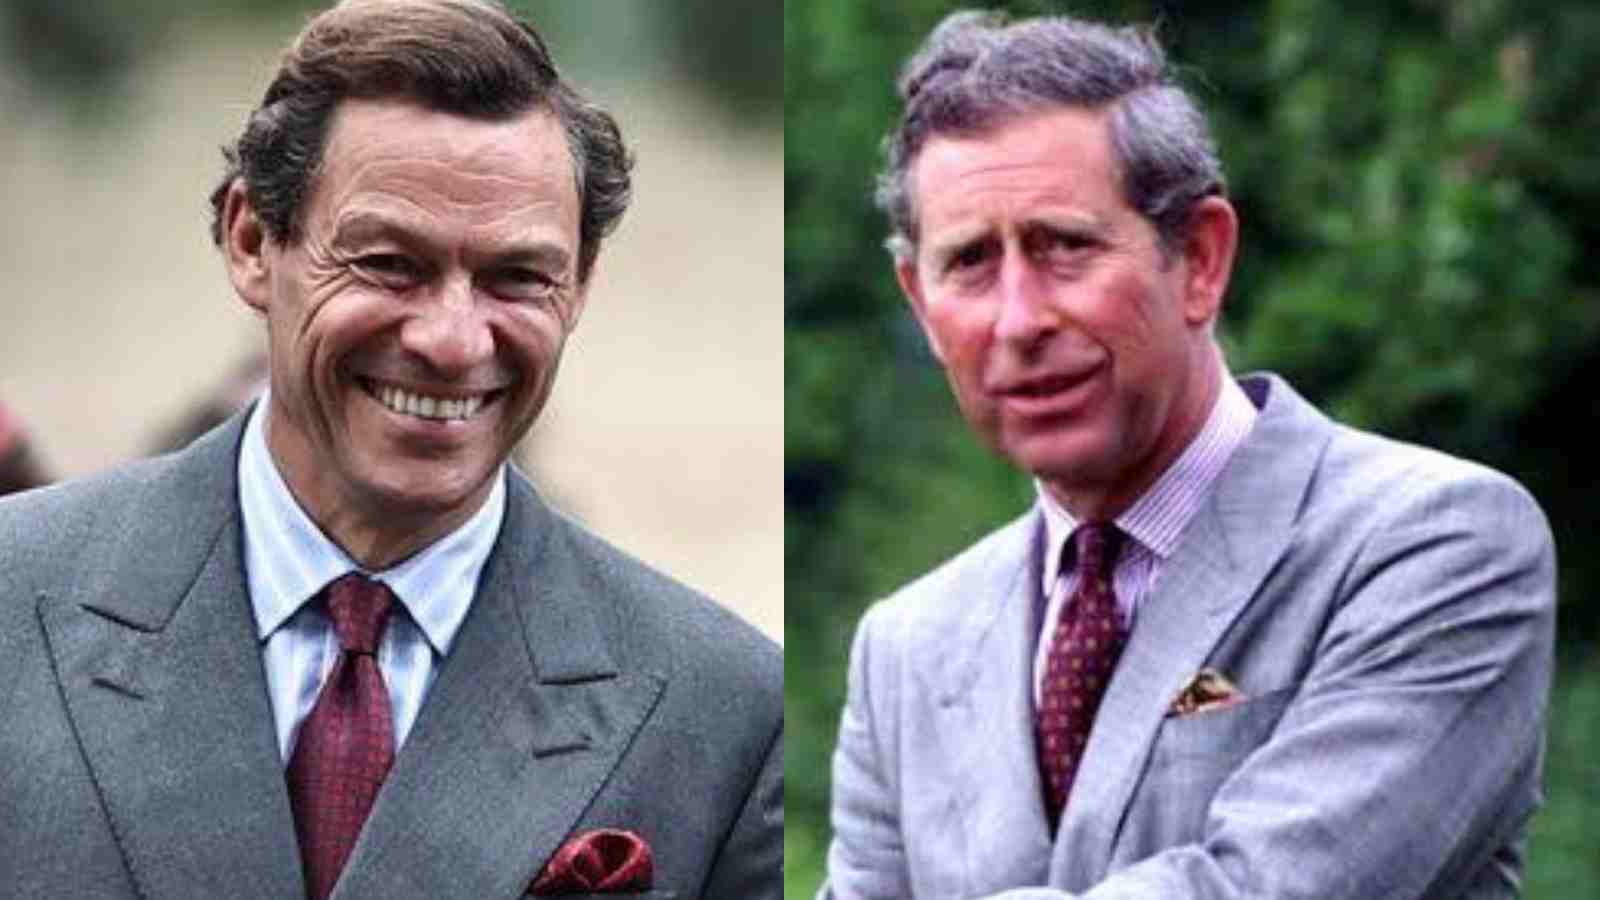 Dominic West as Prince Charles